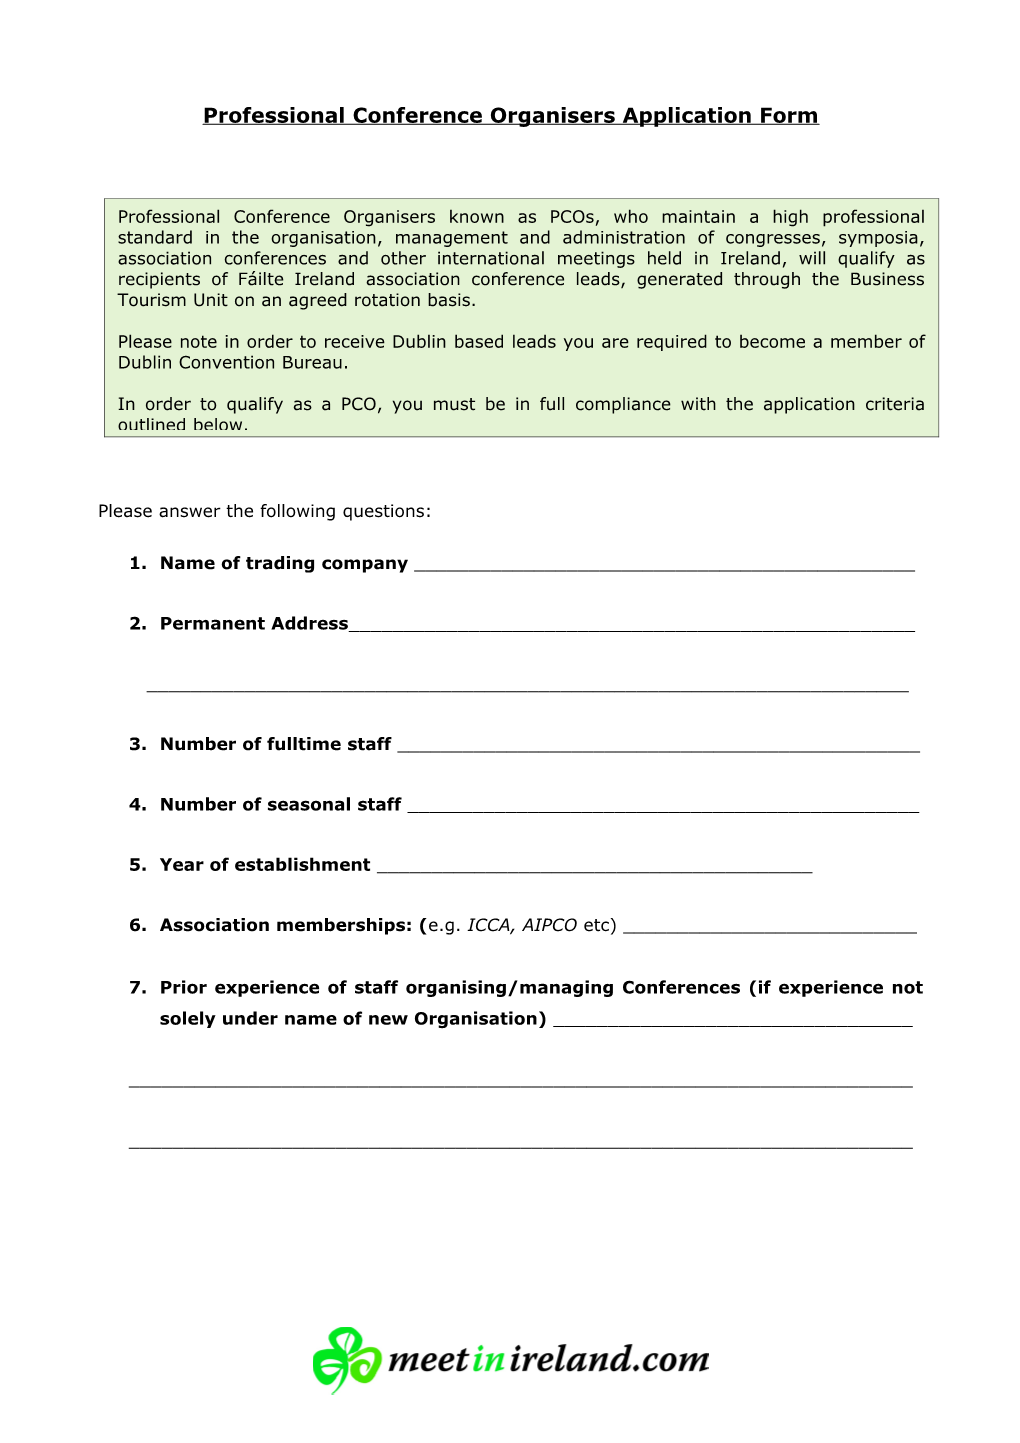 Professional Conference Organisers Application Form